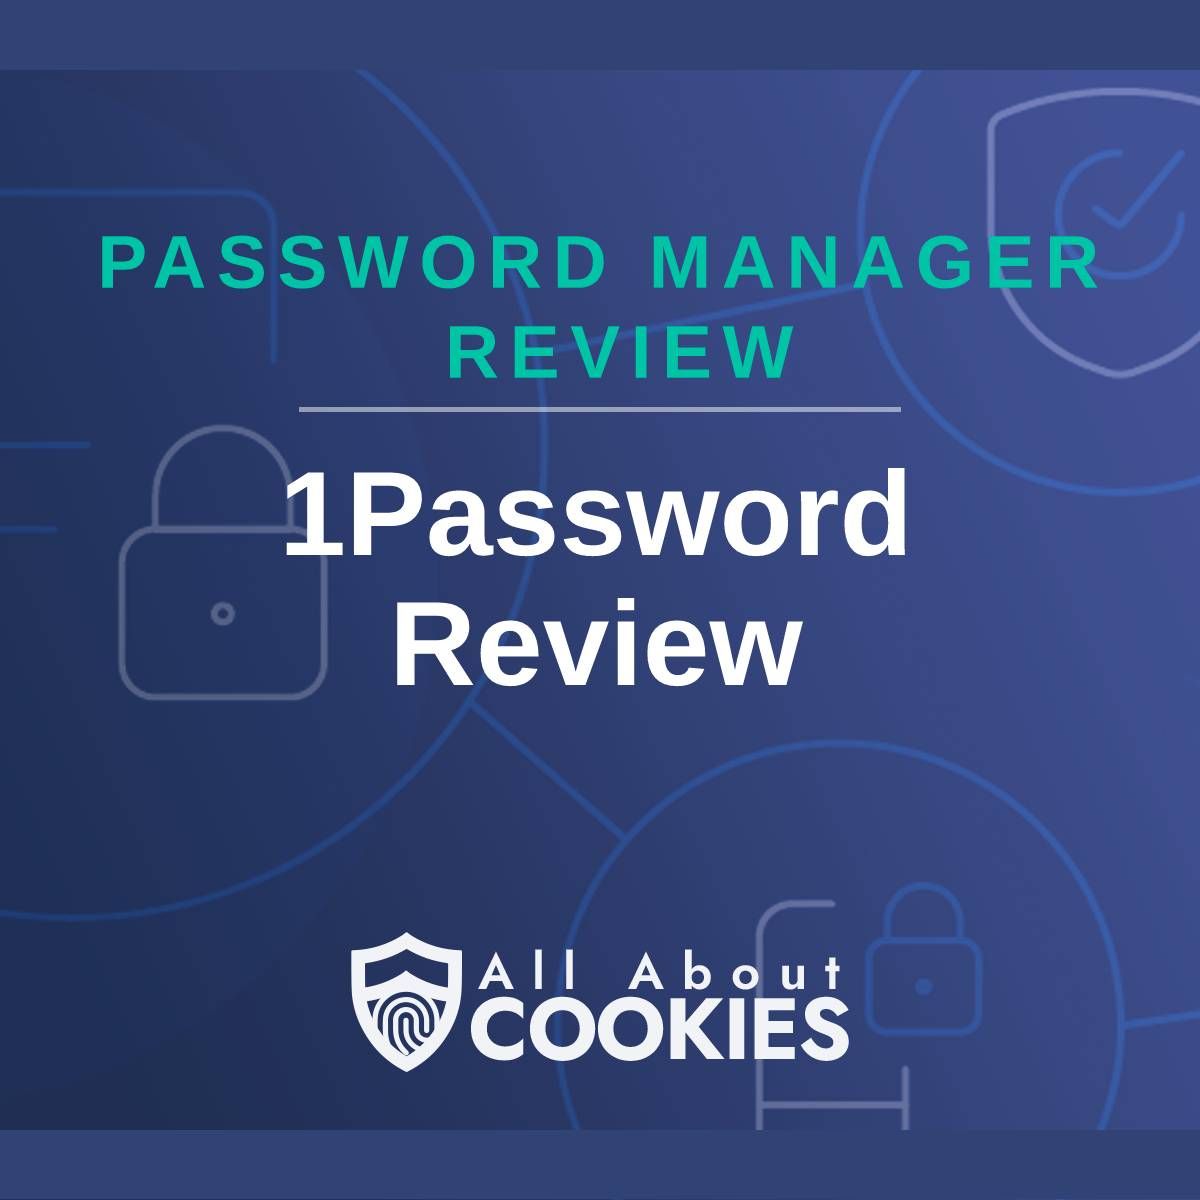 A blue background with images of locks and shields with the text &quot;Password Manager Review 1Password Review&quot; and the All About Cookies logo. 